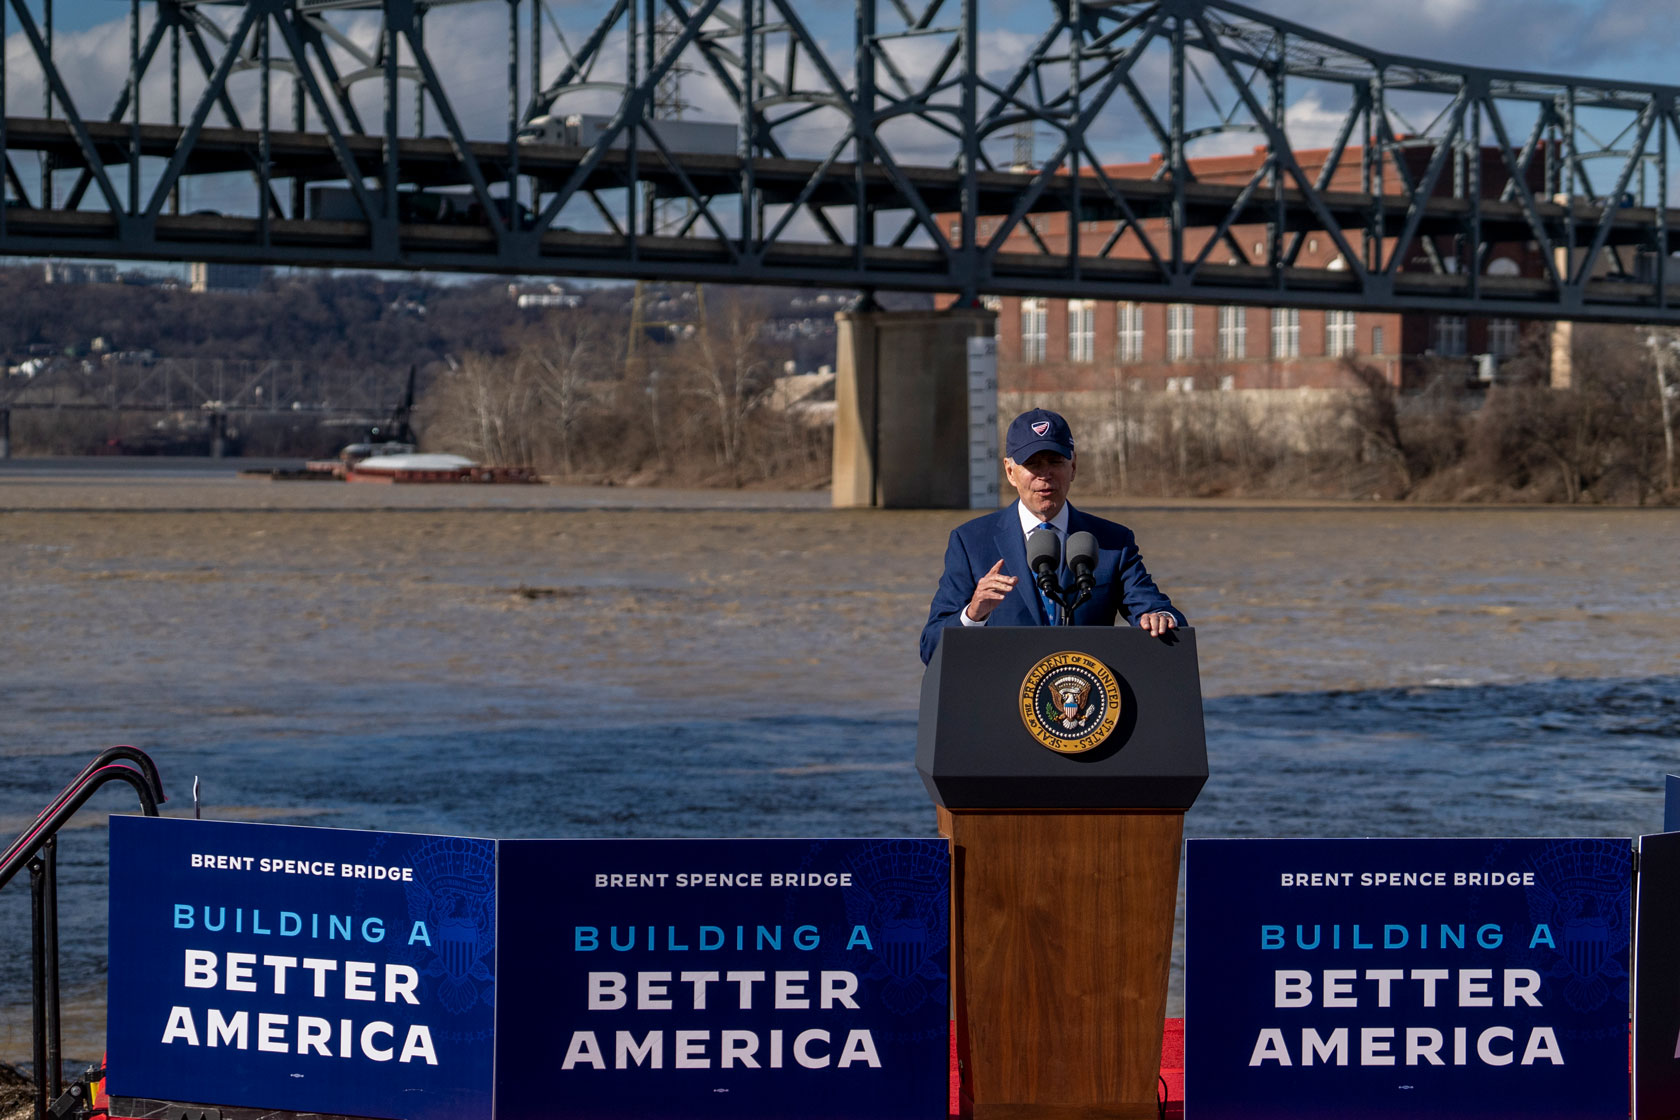 President Joe Biden is seen at a podium in front of a river with a bridge in the background.